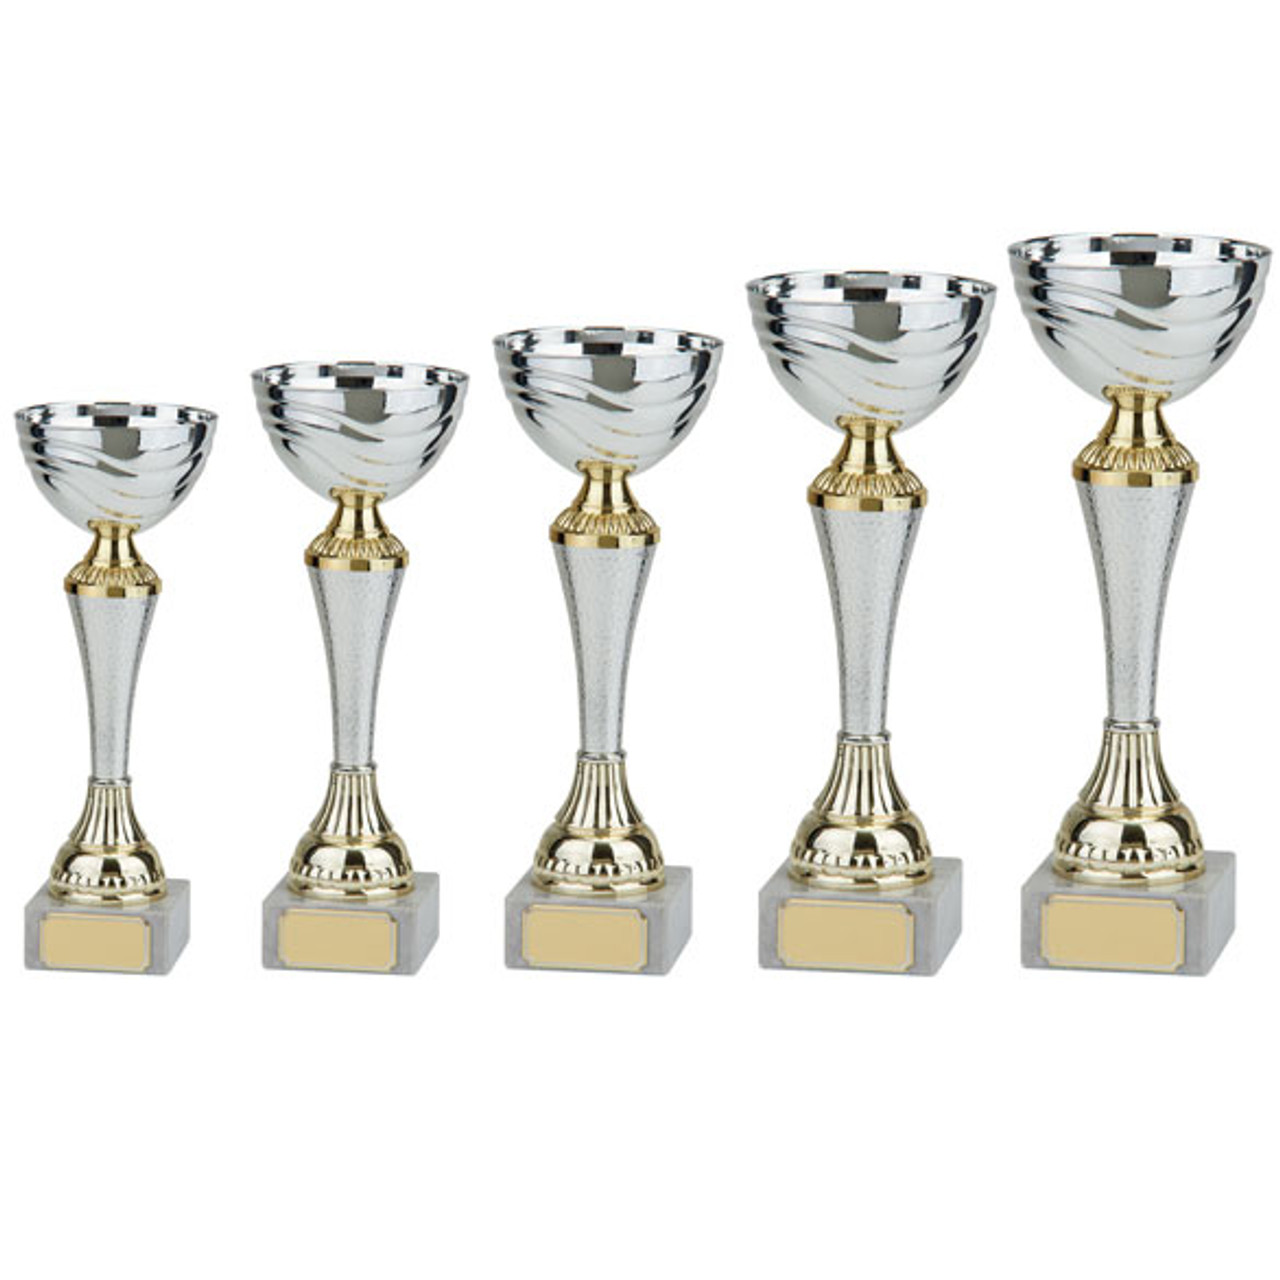 EVEREST Silver & Gold Cup Trophy Series